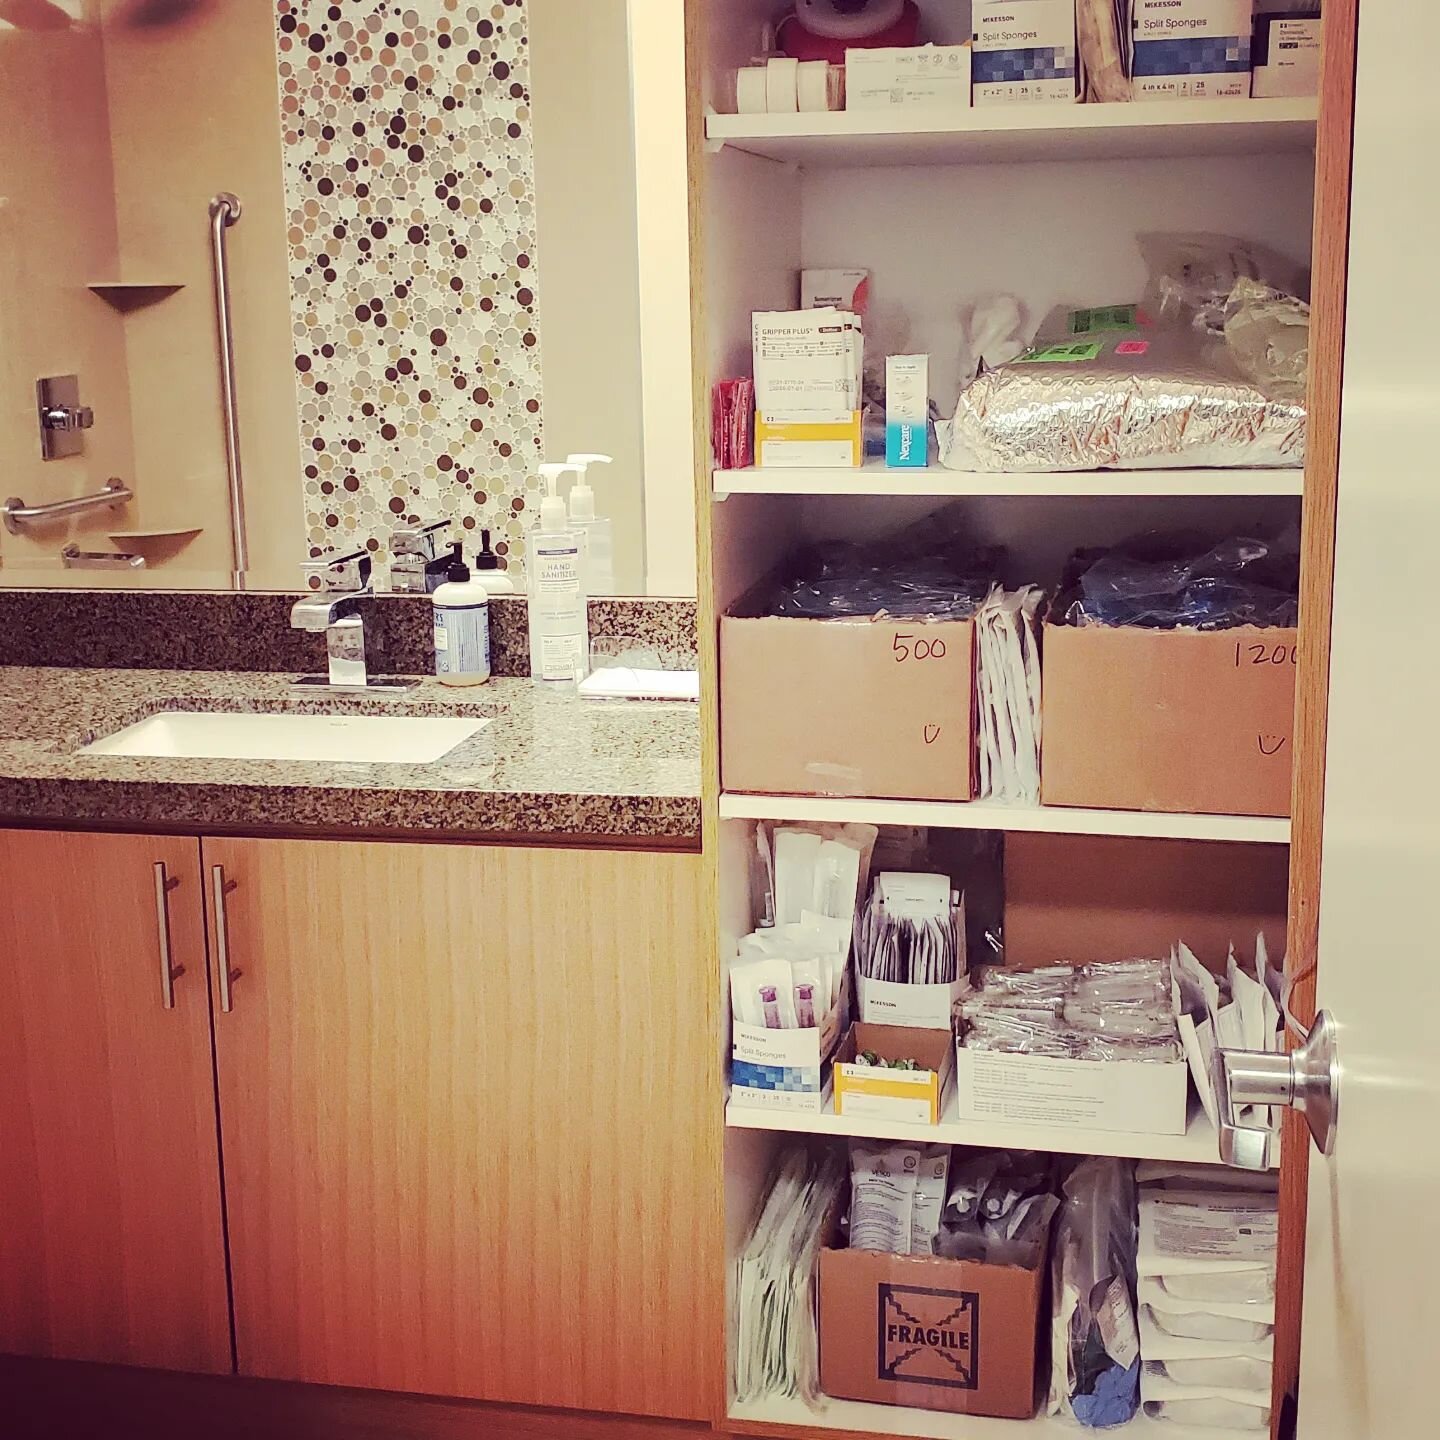 There's no need for fancy containers to get organized. Here, I organized medical supplies in cardboard boxes, tearing off box tops for easy access.
*
*
*
*
#seattlesidekick #personalassistant #seattleorganizer #getorganized